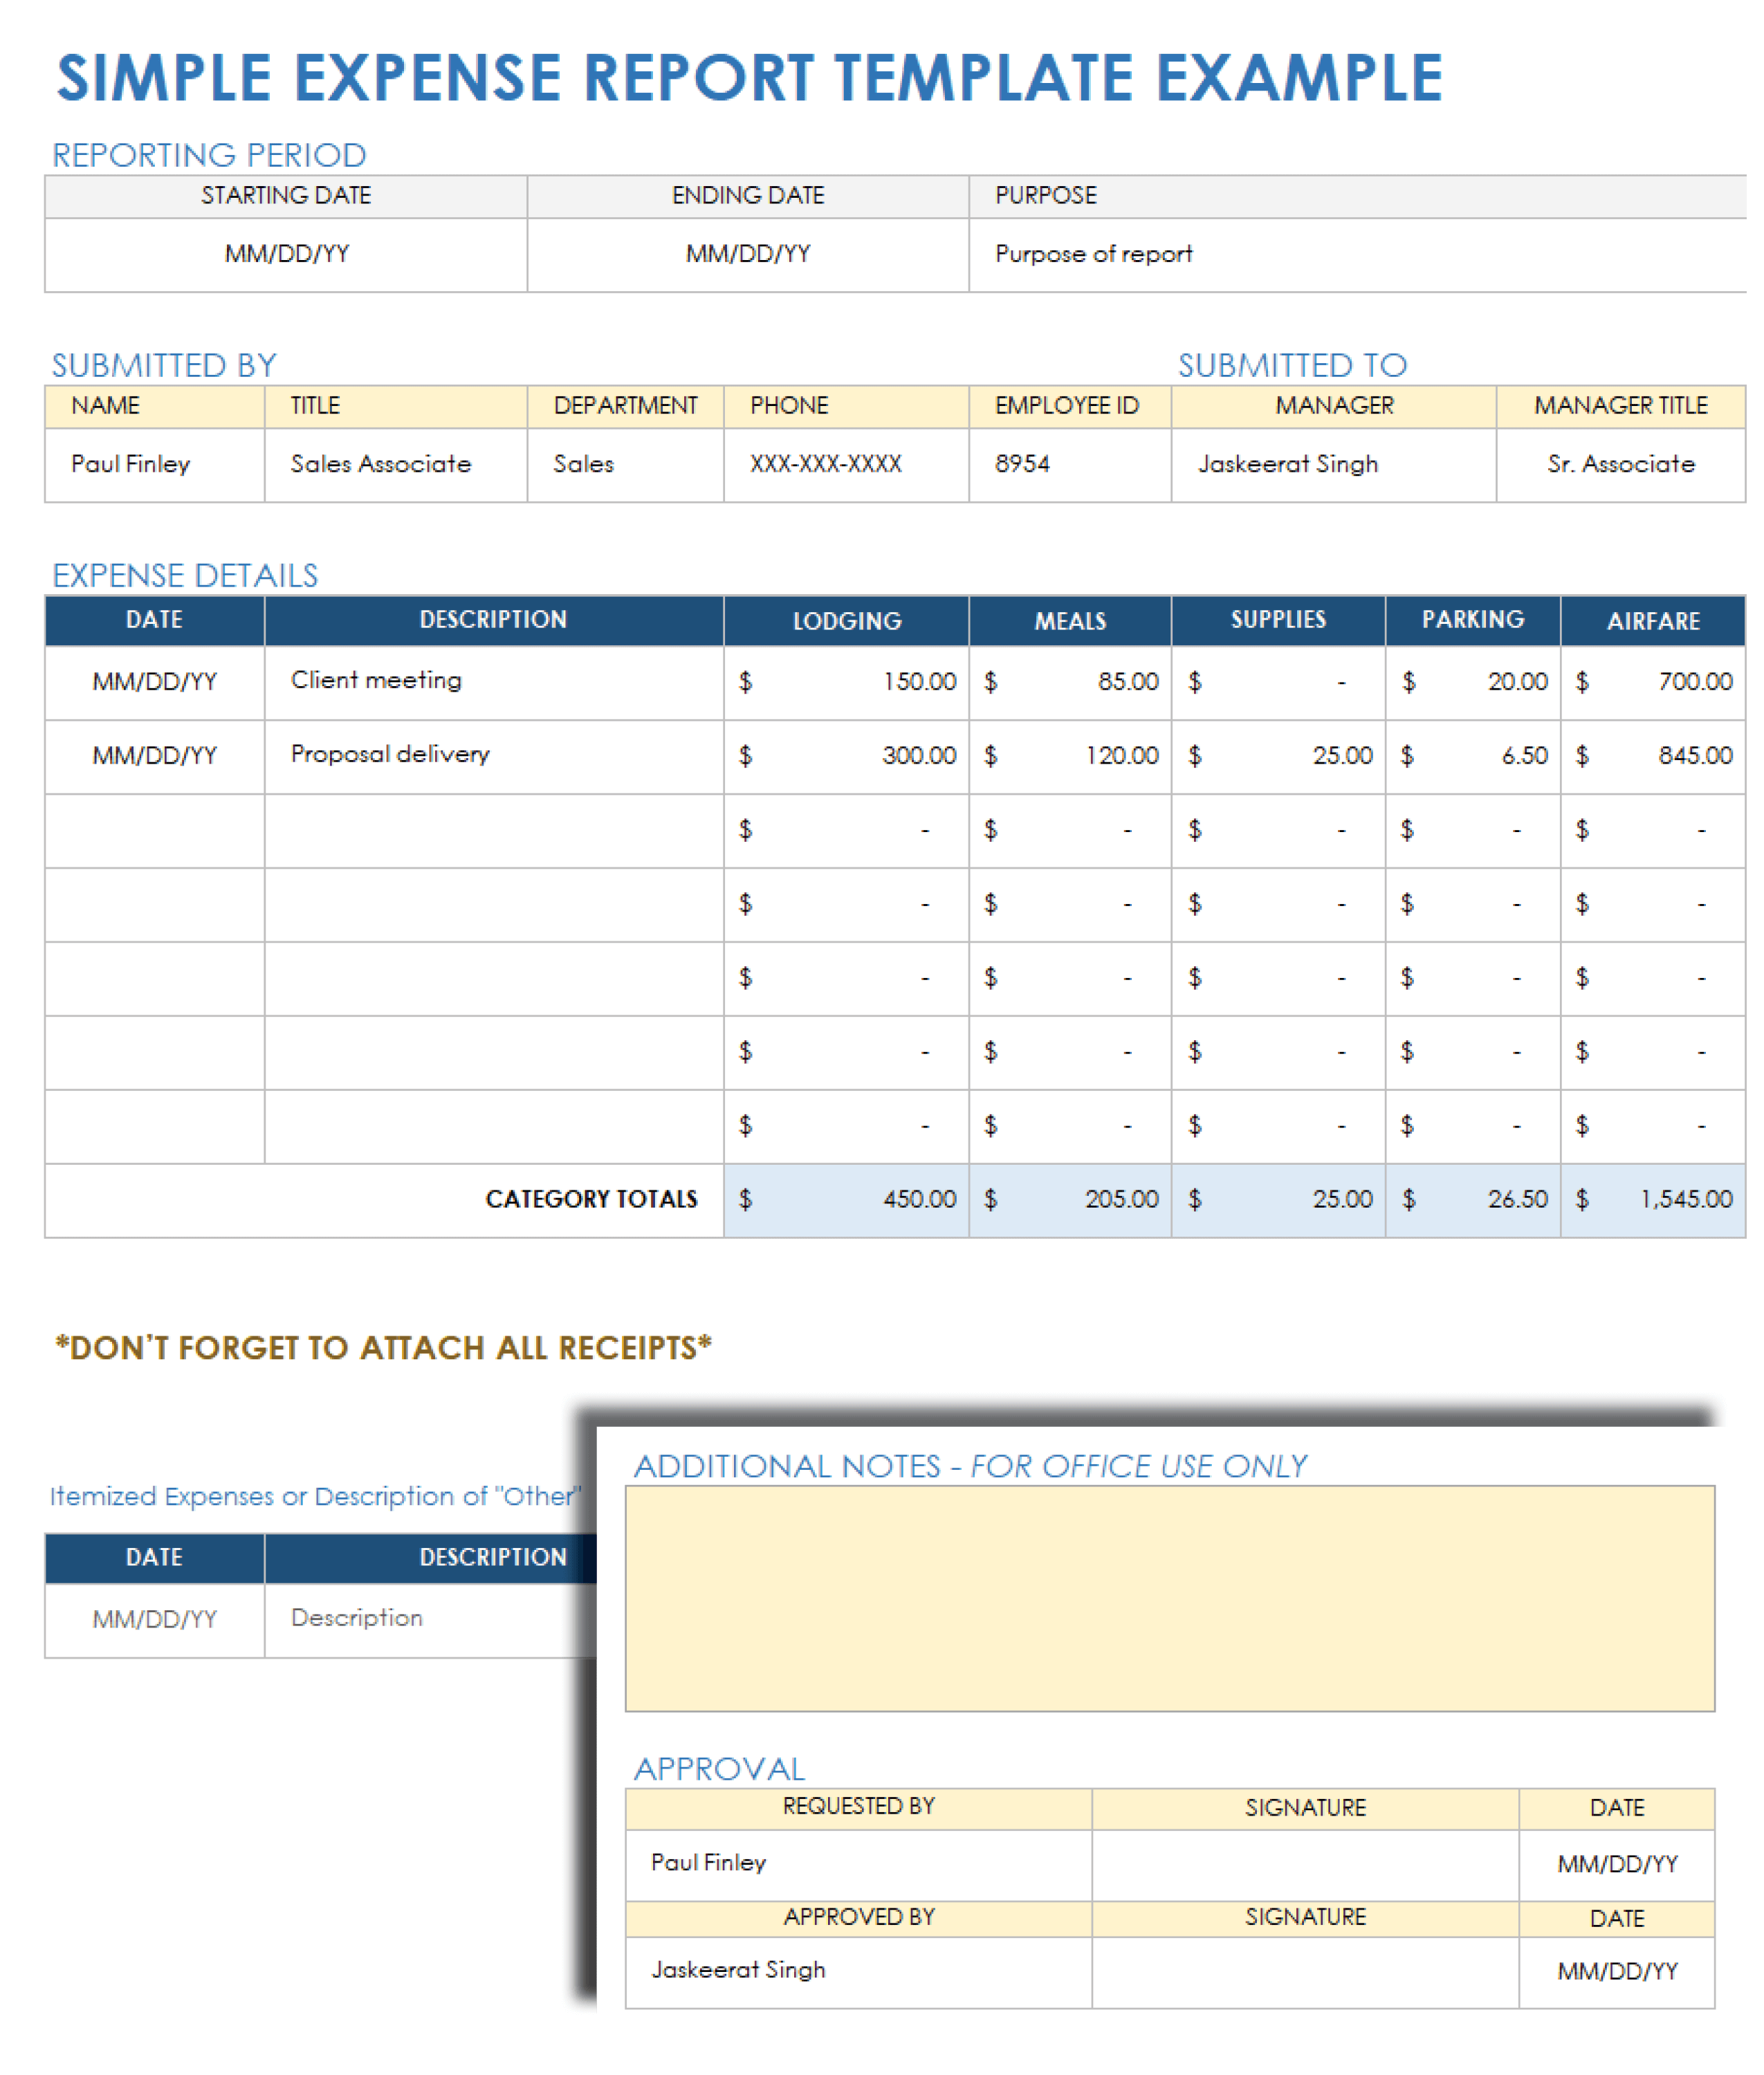 Example Simple Expense Report Template